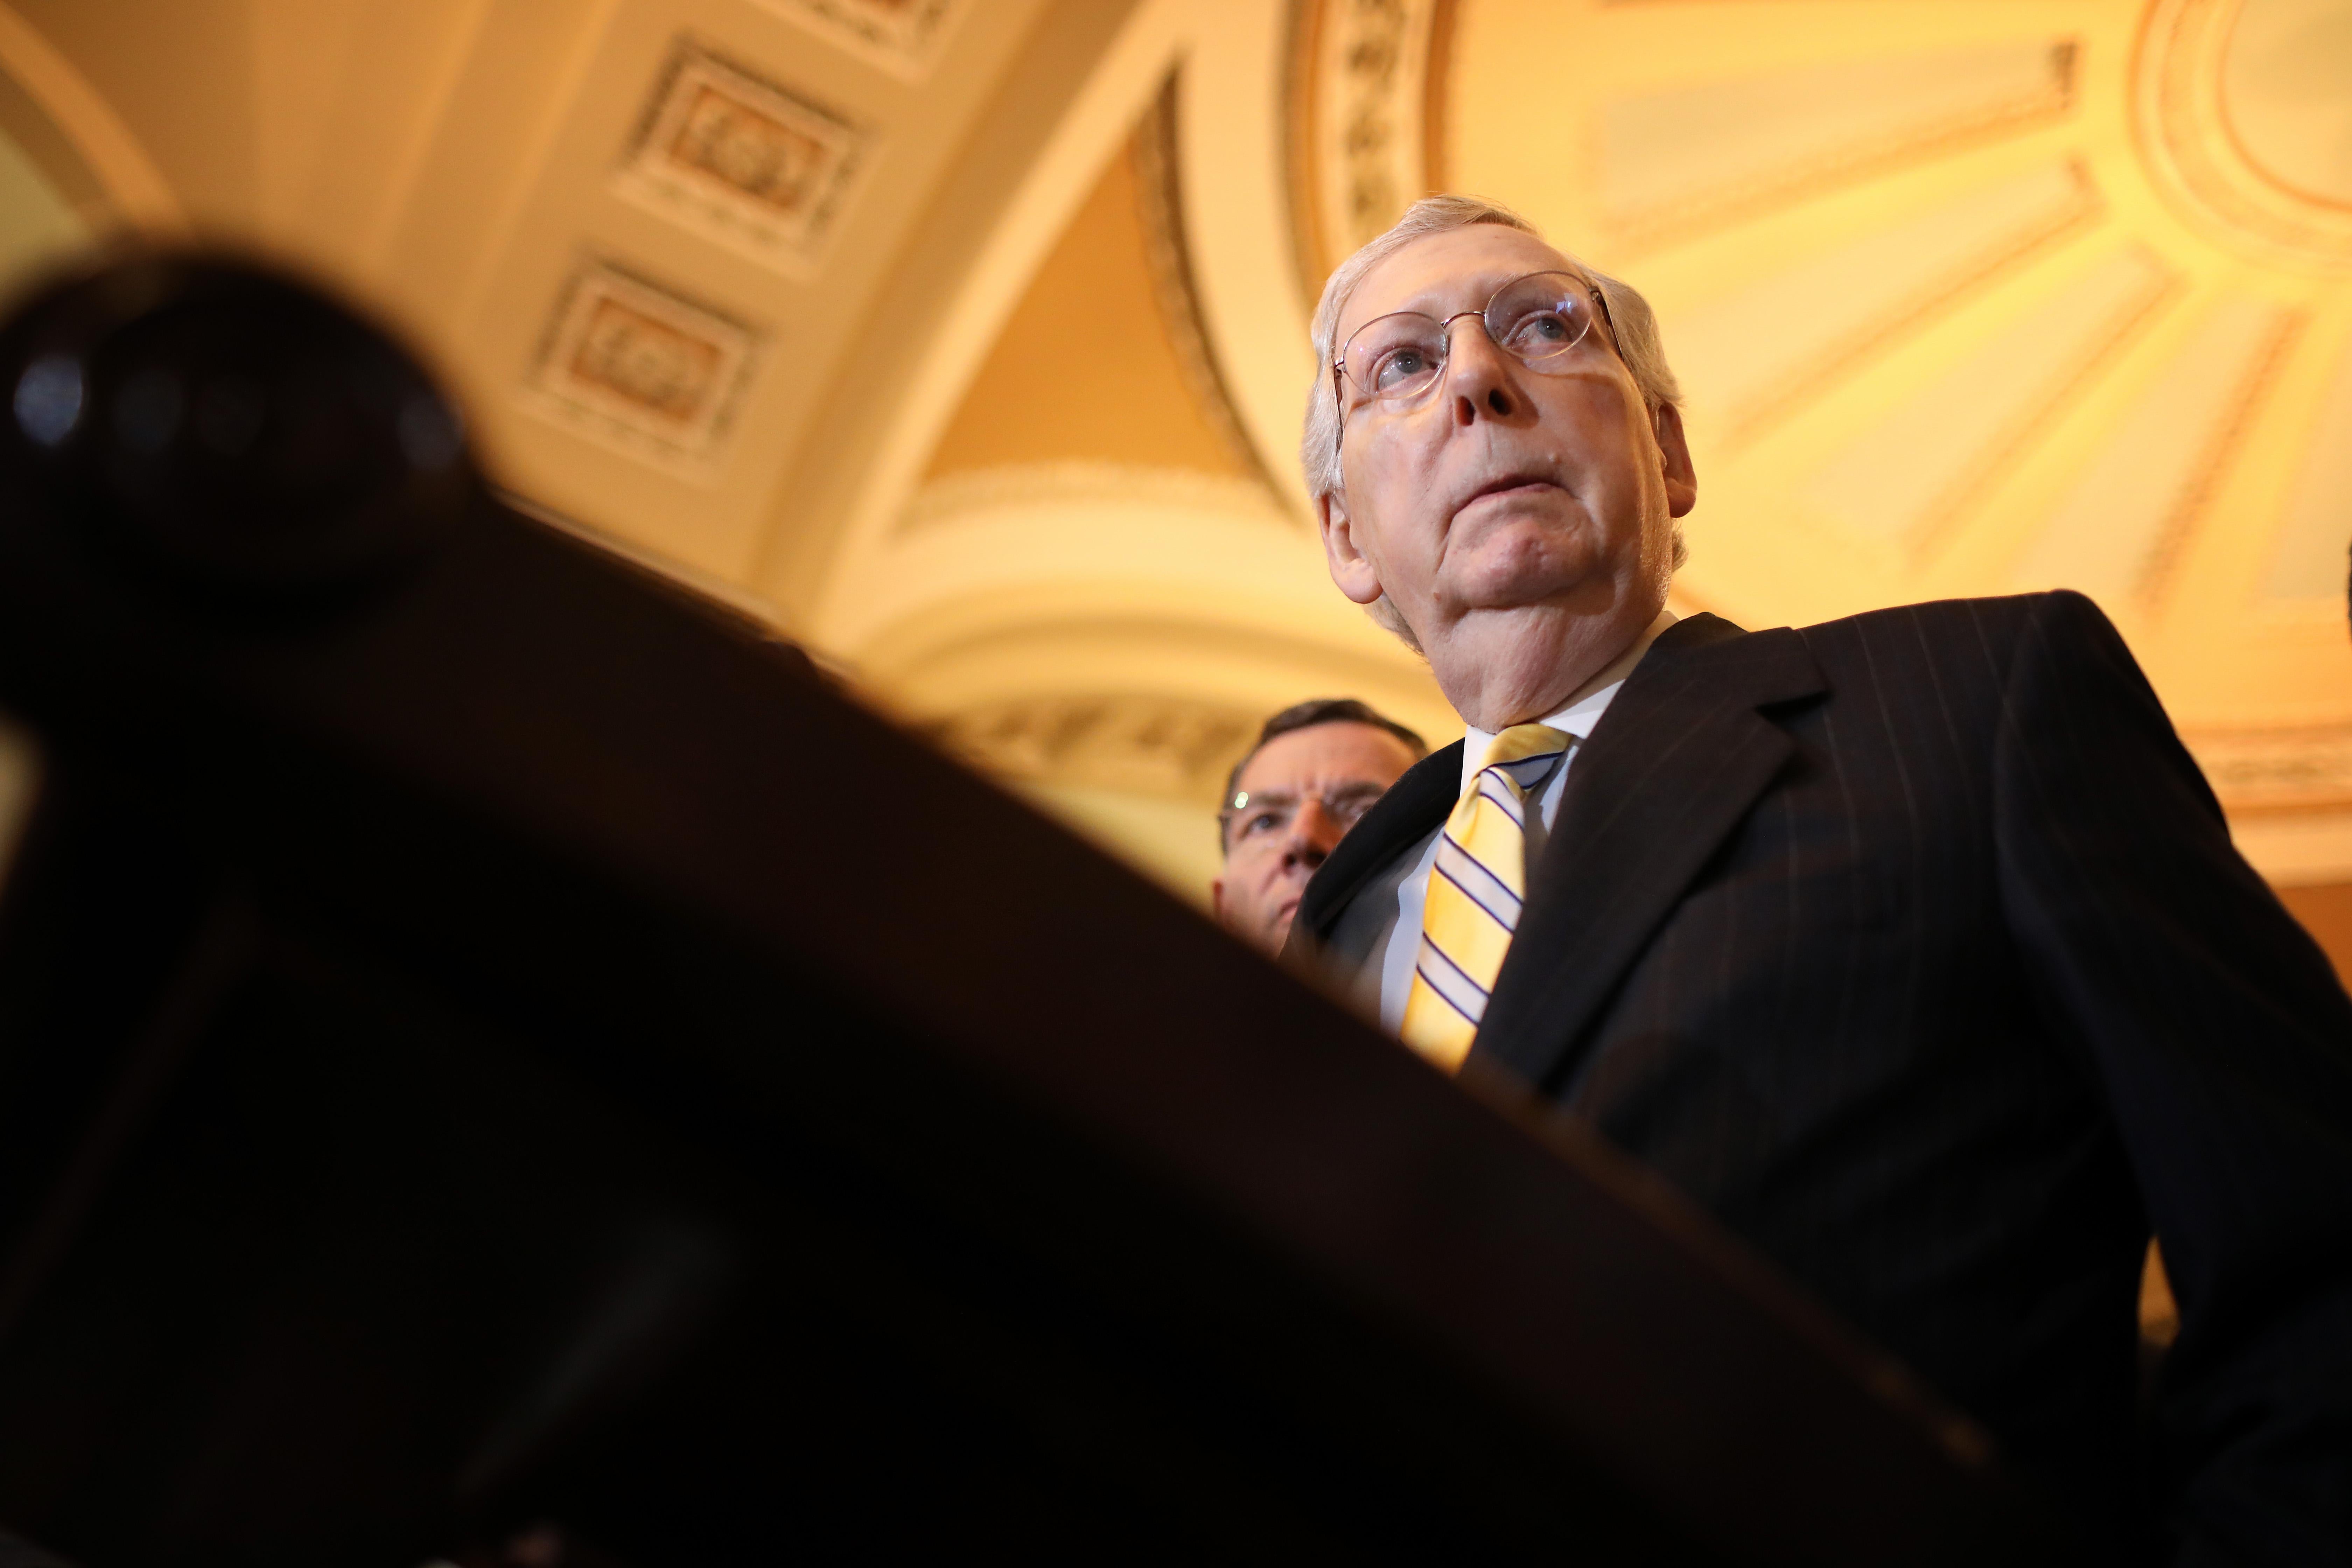 Mitch McConnell stands at a podium, with the ceiling of the U.S. Capitol in the background.